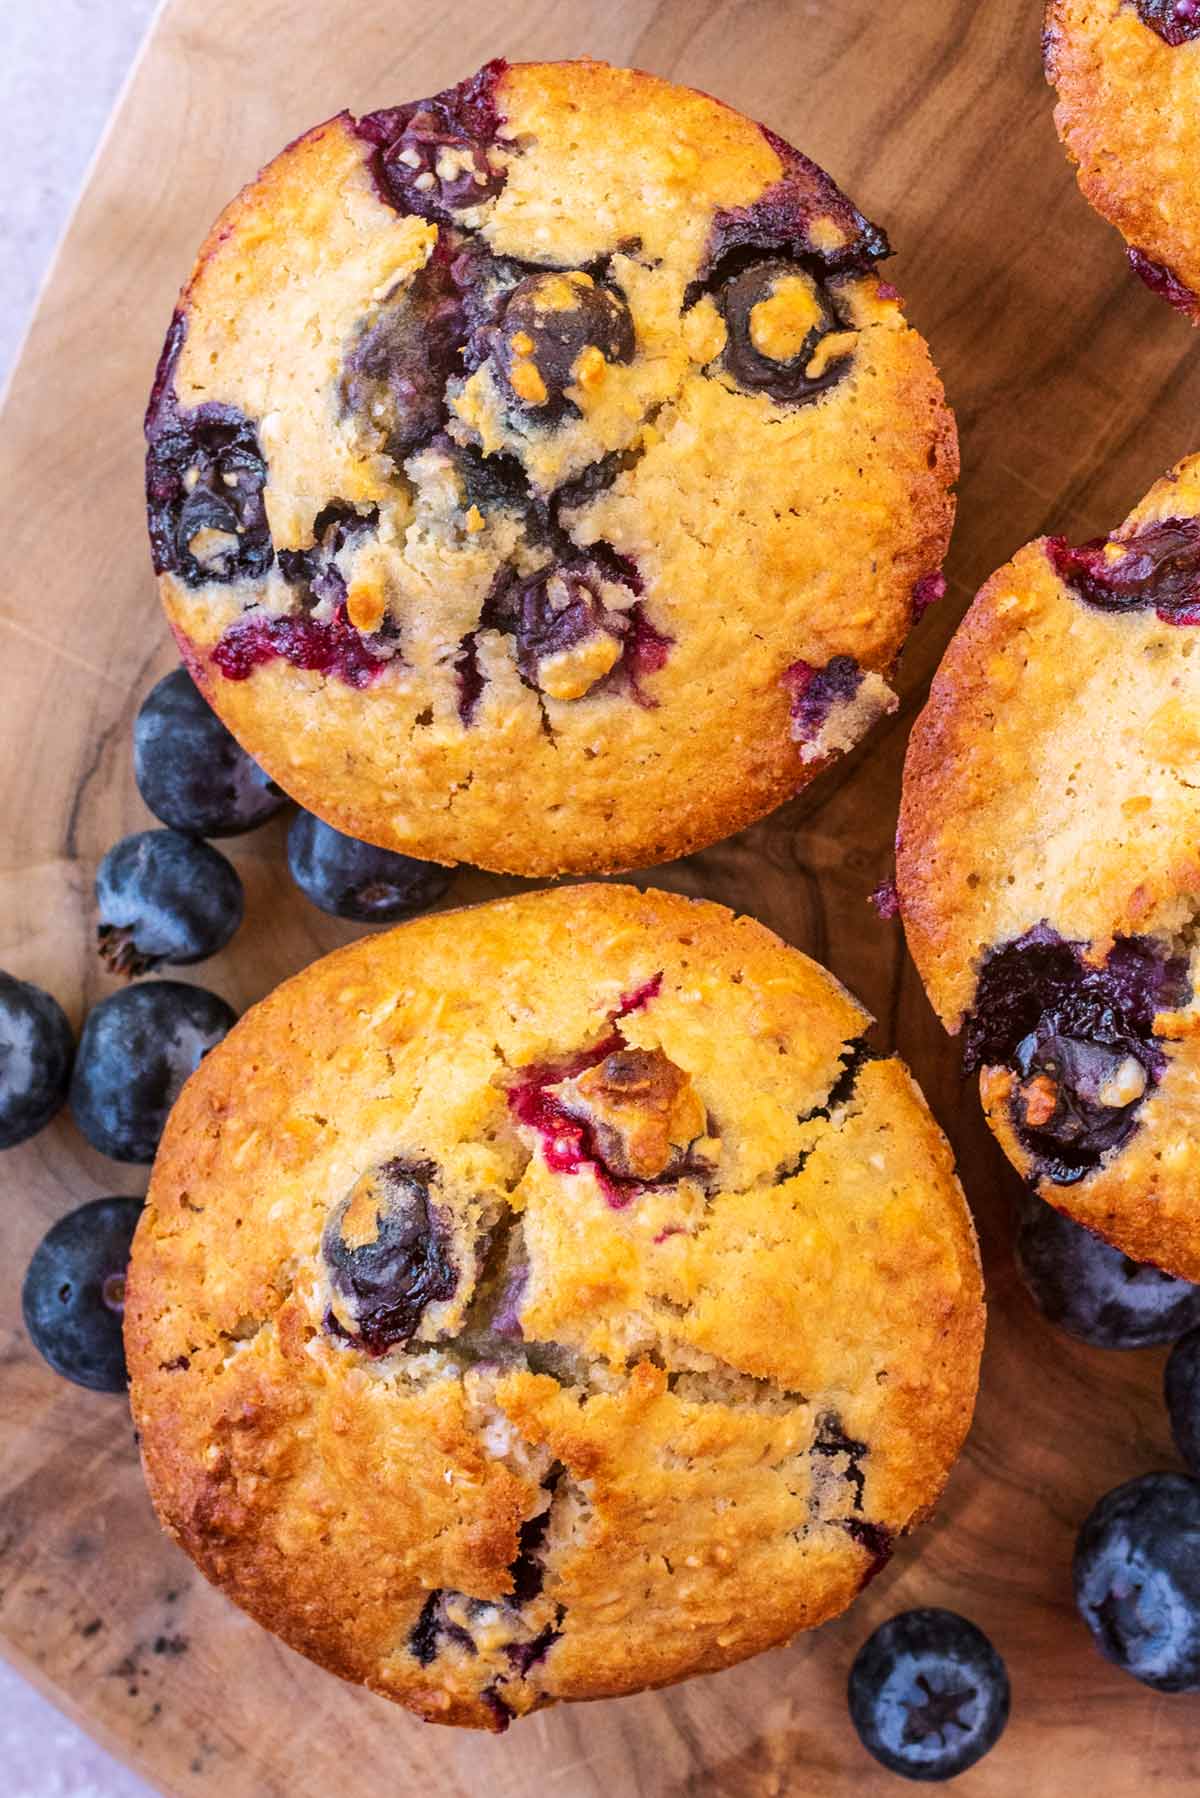 Two blueberry muffins surrounded by some blueberries.